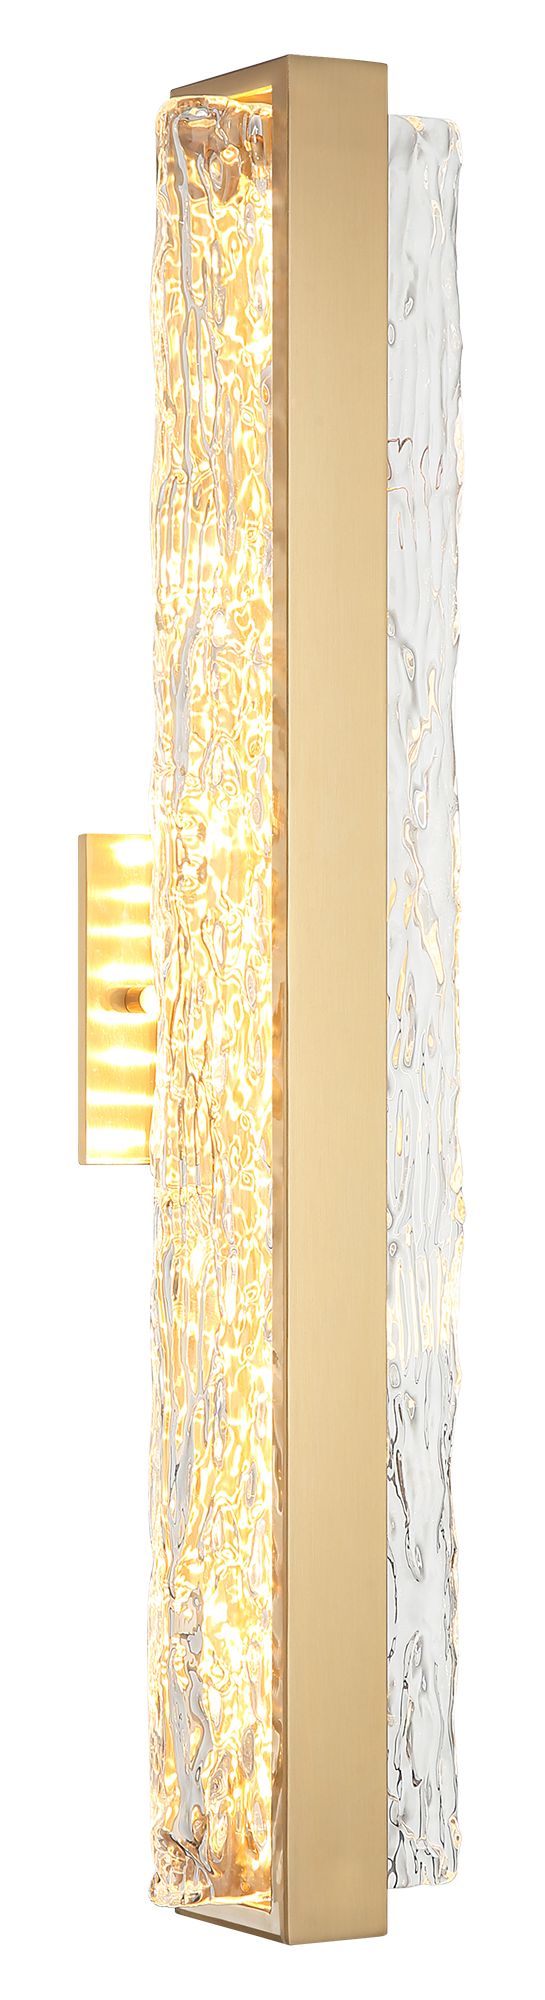 NIAGARA Wall sconce Gold INTEGRATED LED - S02024AG | MATTEO